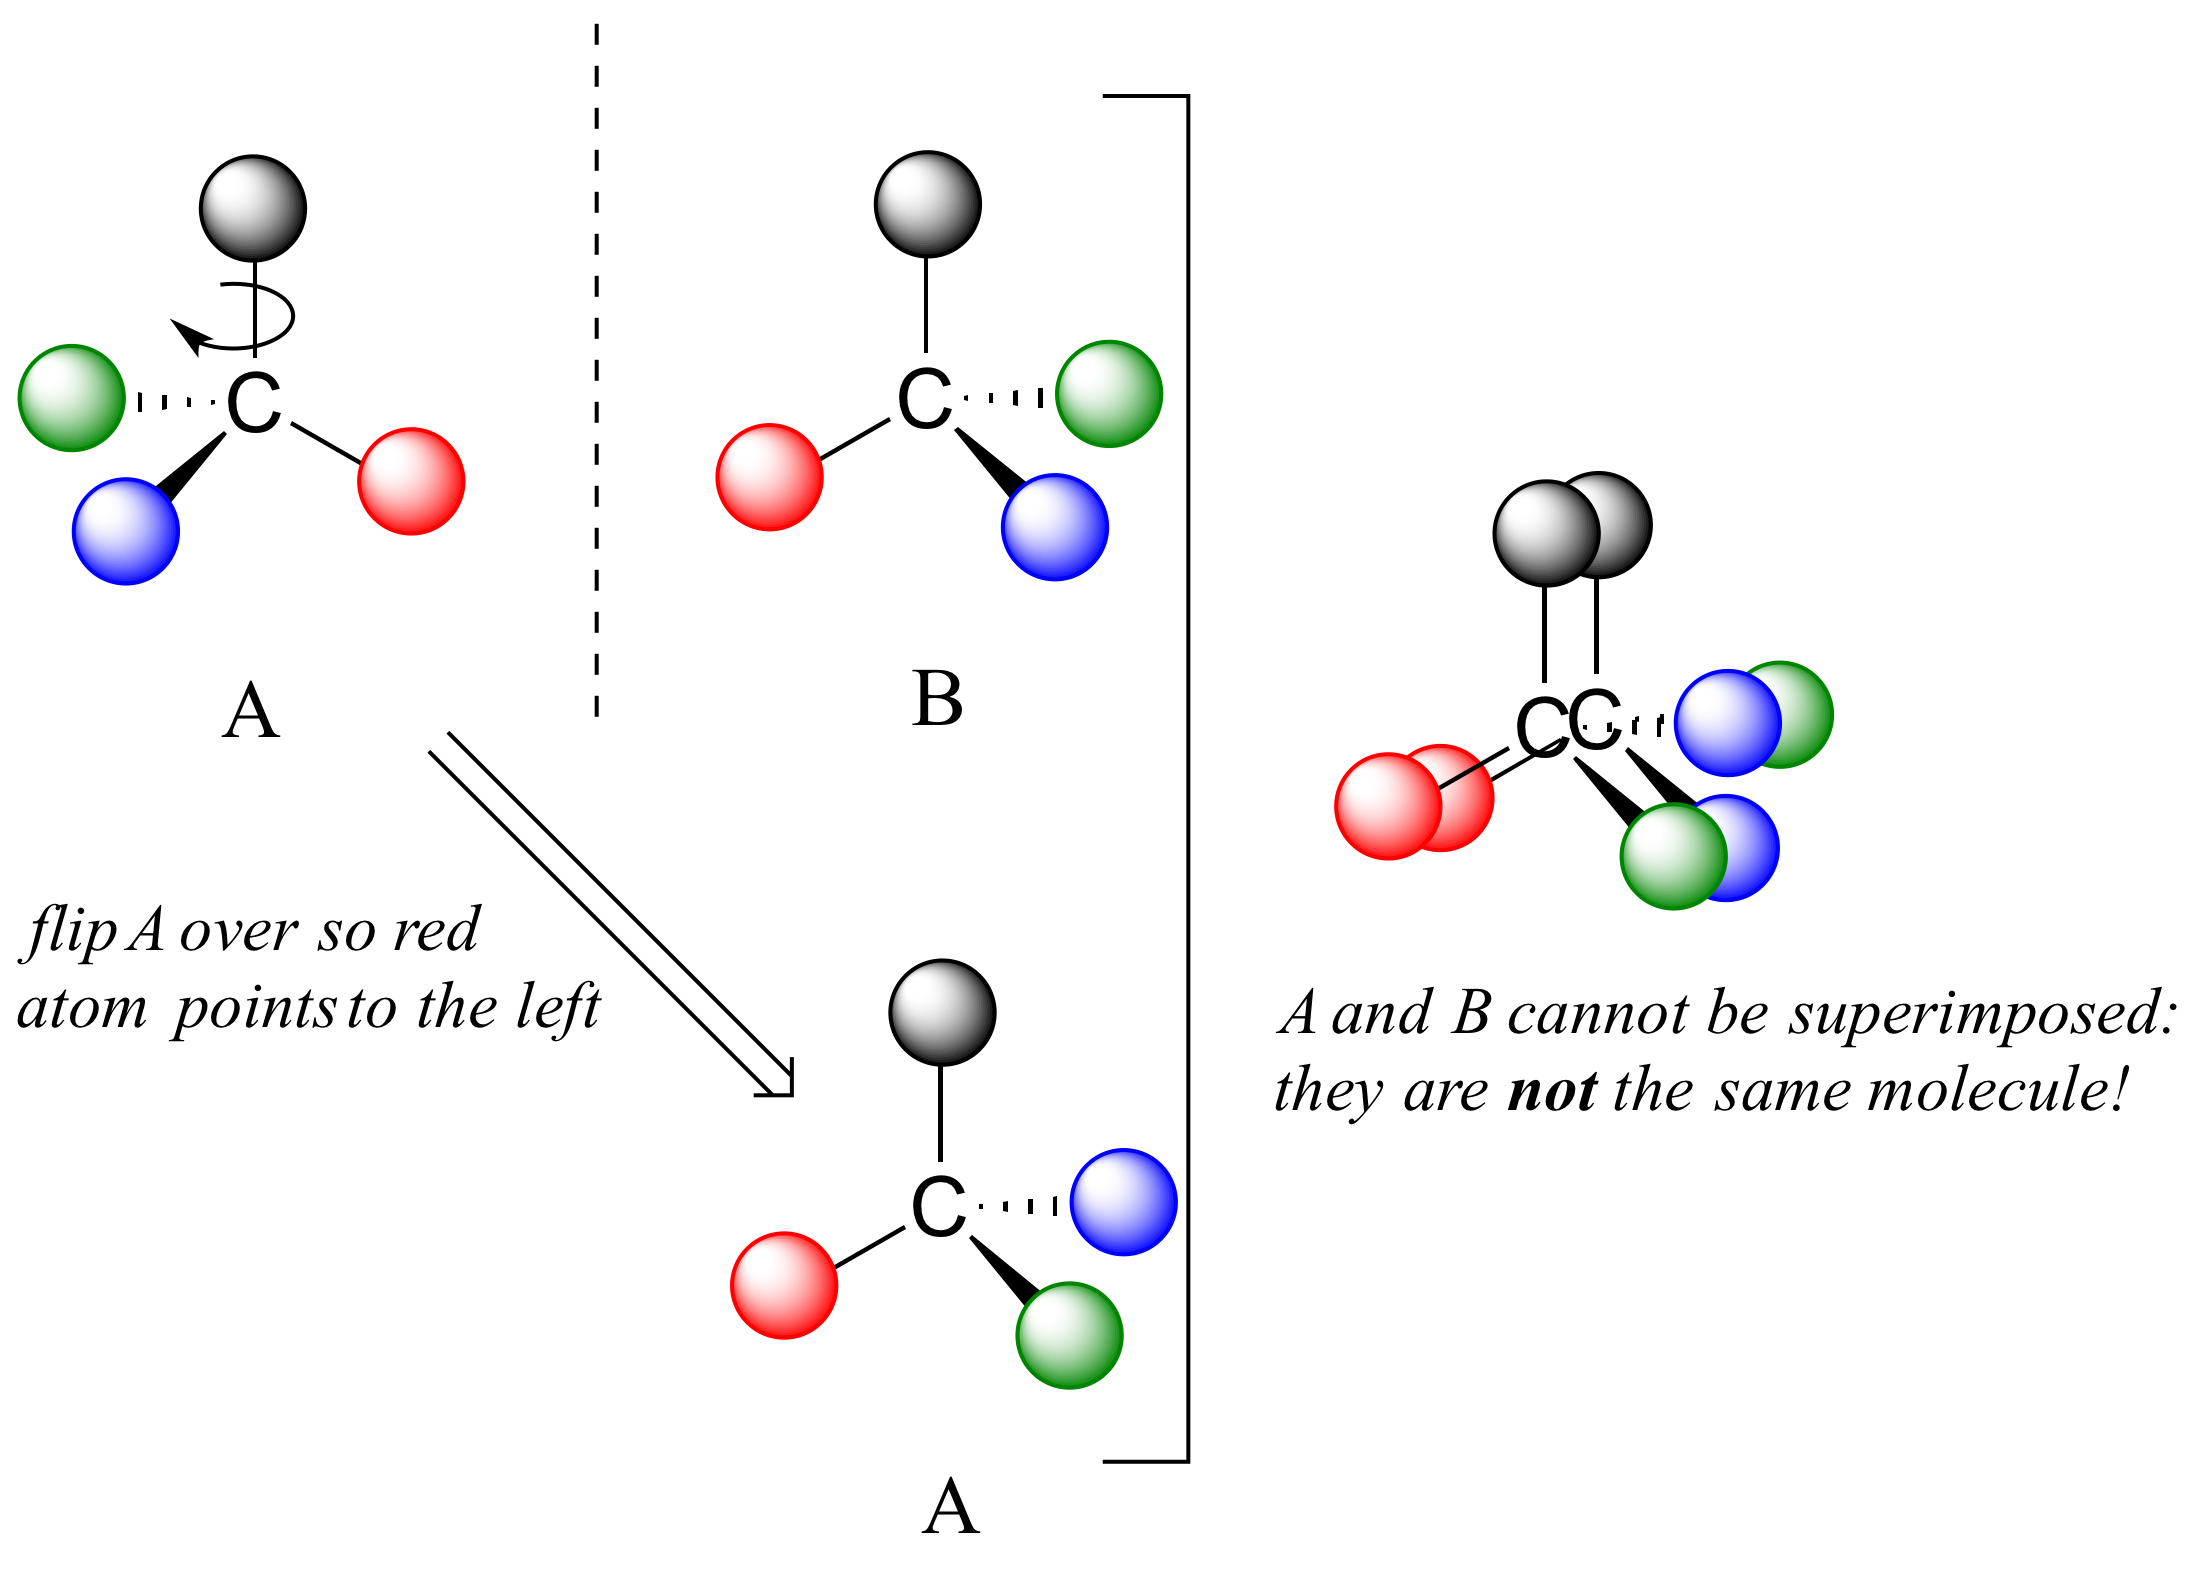 Models A and B from the earlier figure are shown again: This diagram shows that flipping structure A results in the red ball placed to the left as in B. The resulting structure has a solid wedge to green and dashed wedge to blue, so the structure is not superimposable with structure B. A and B cannot be superimposed no matter how they are flipped or turned: they are not the same molecule.